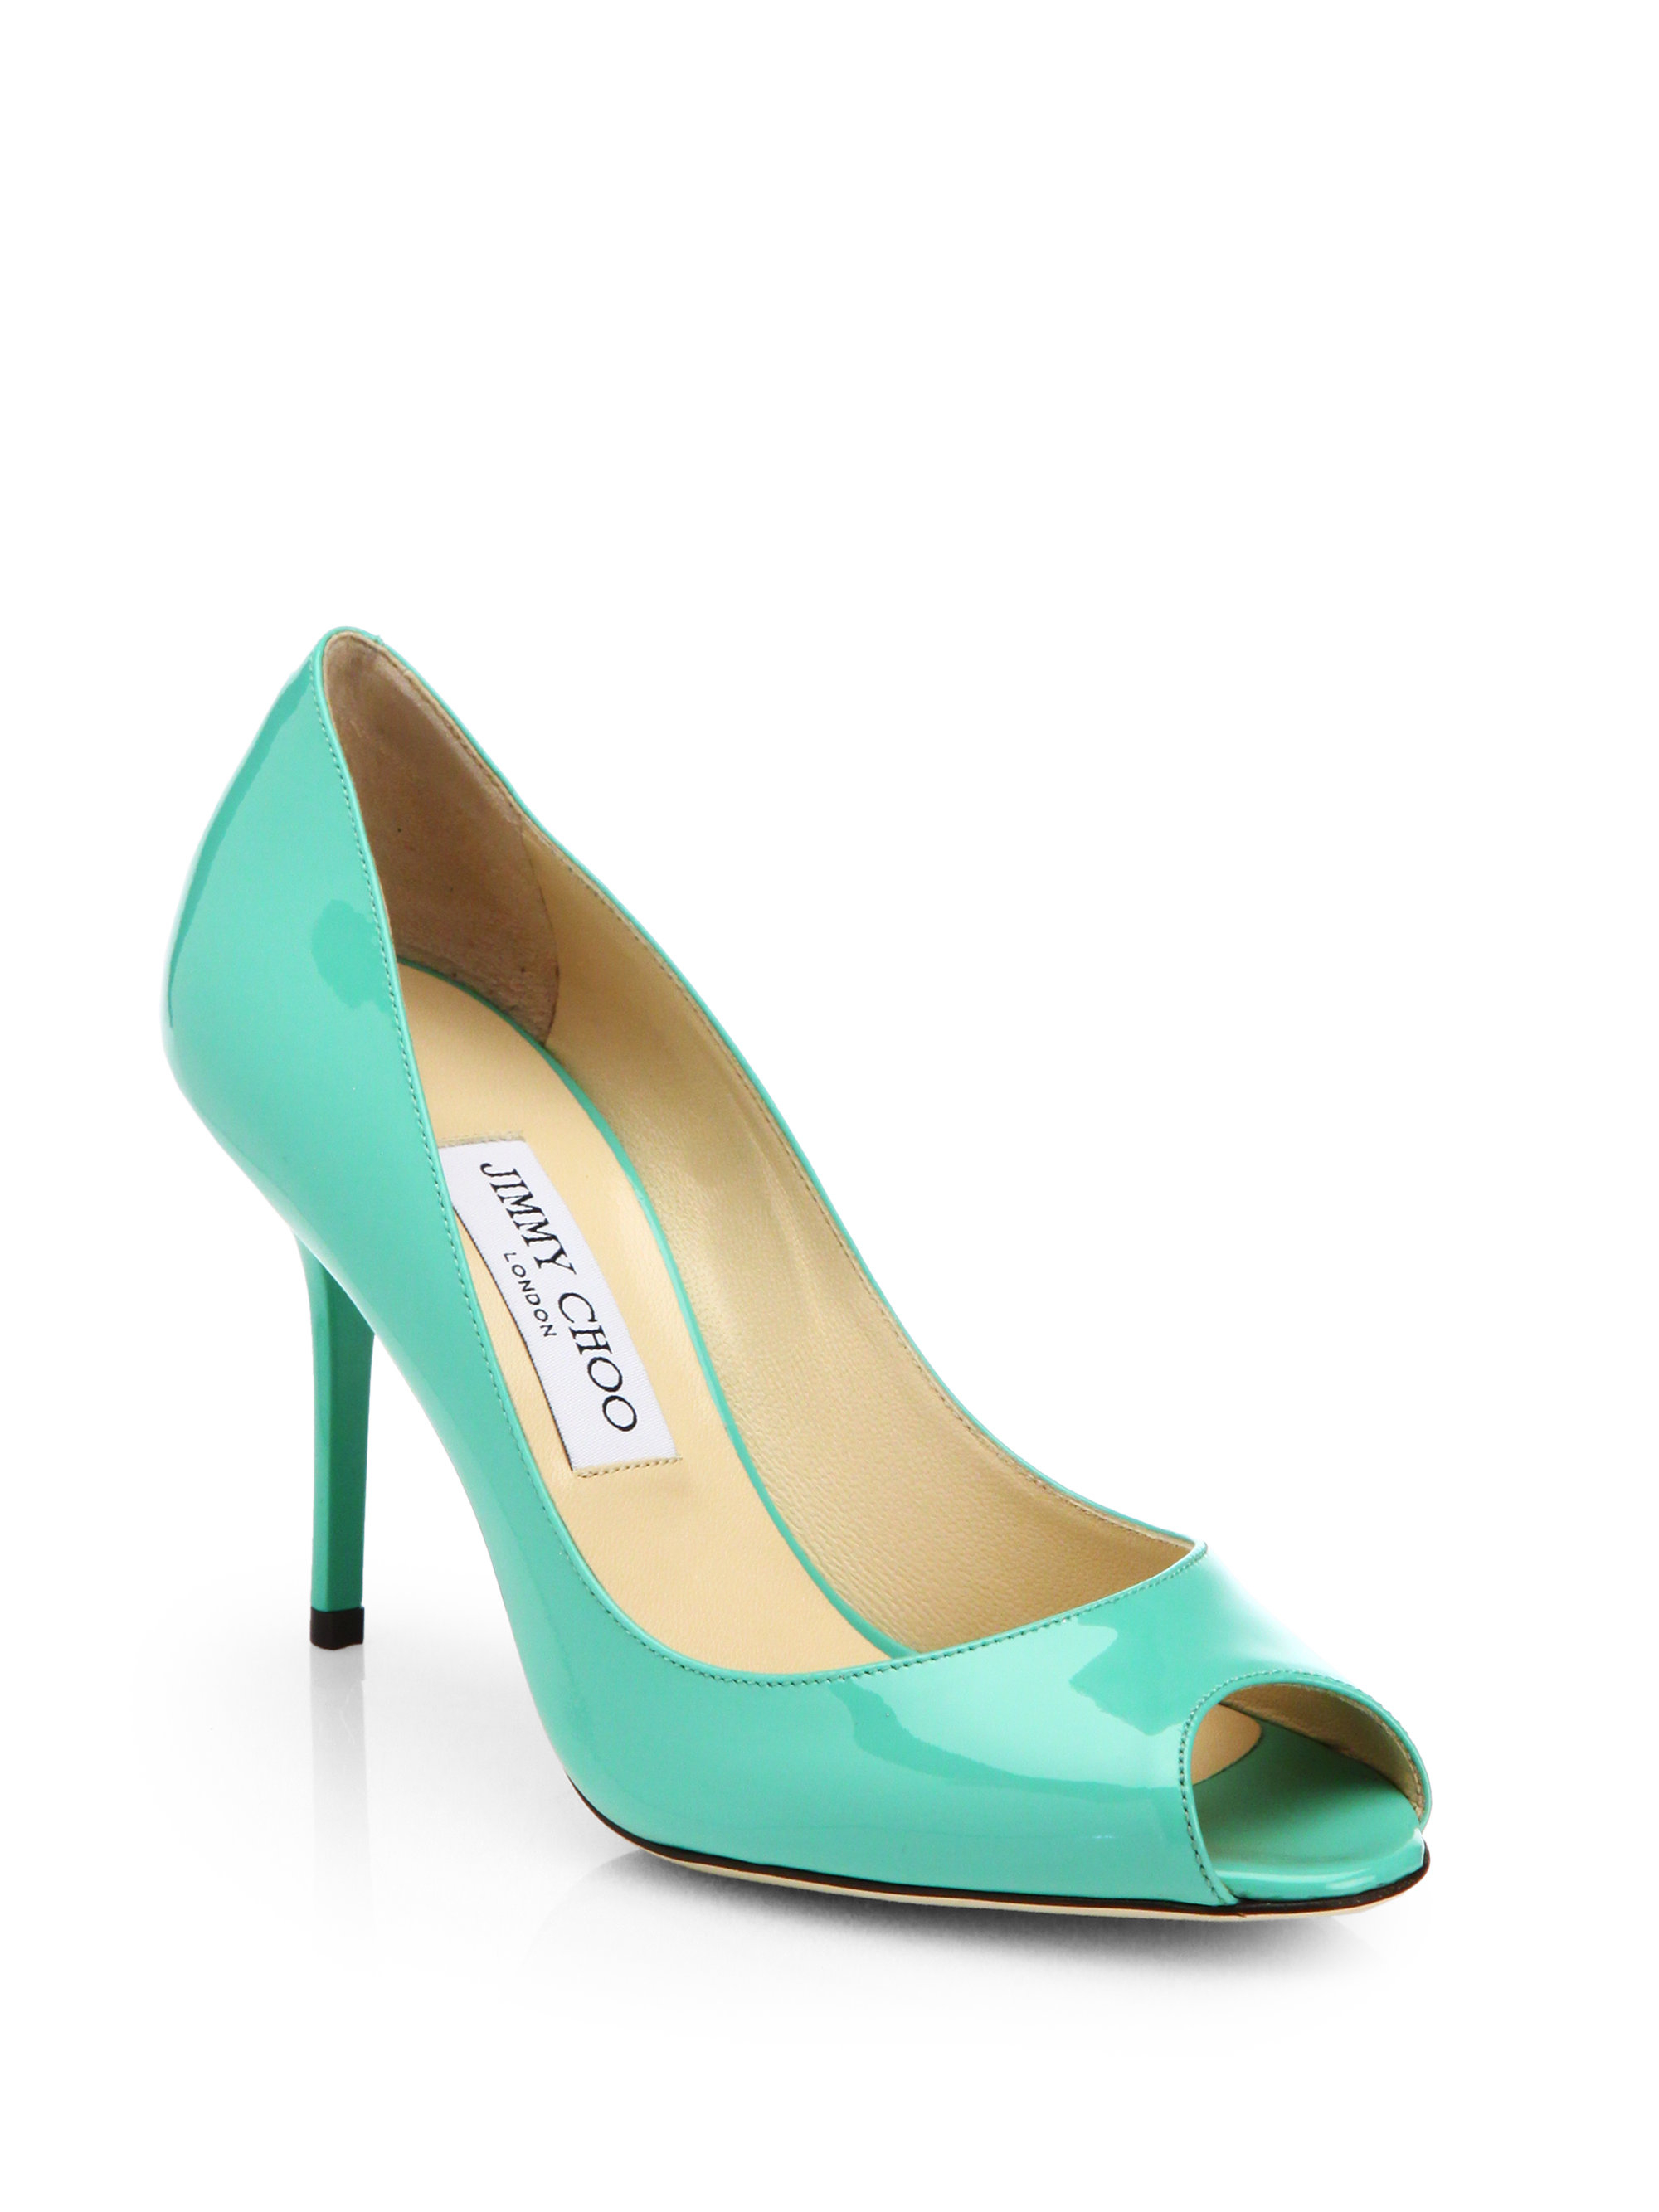 Lyst - Jimmy Choo Evelyn Patent Leather Peep-Toe Pumps in Green